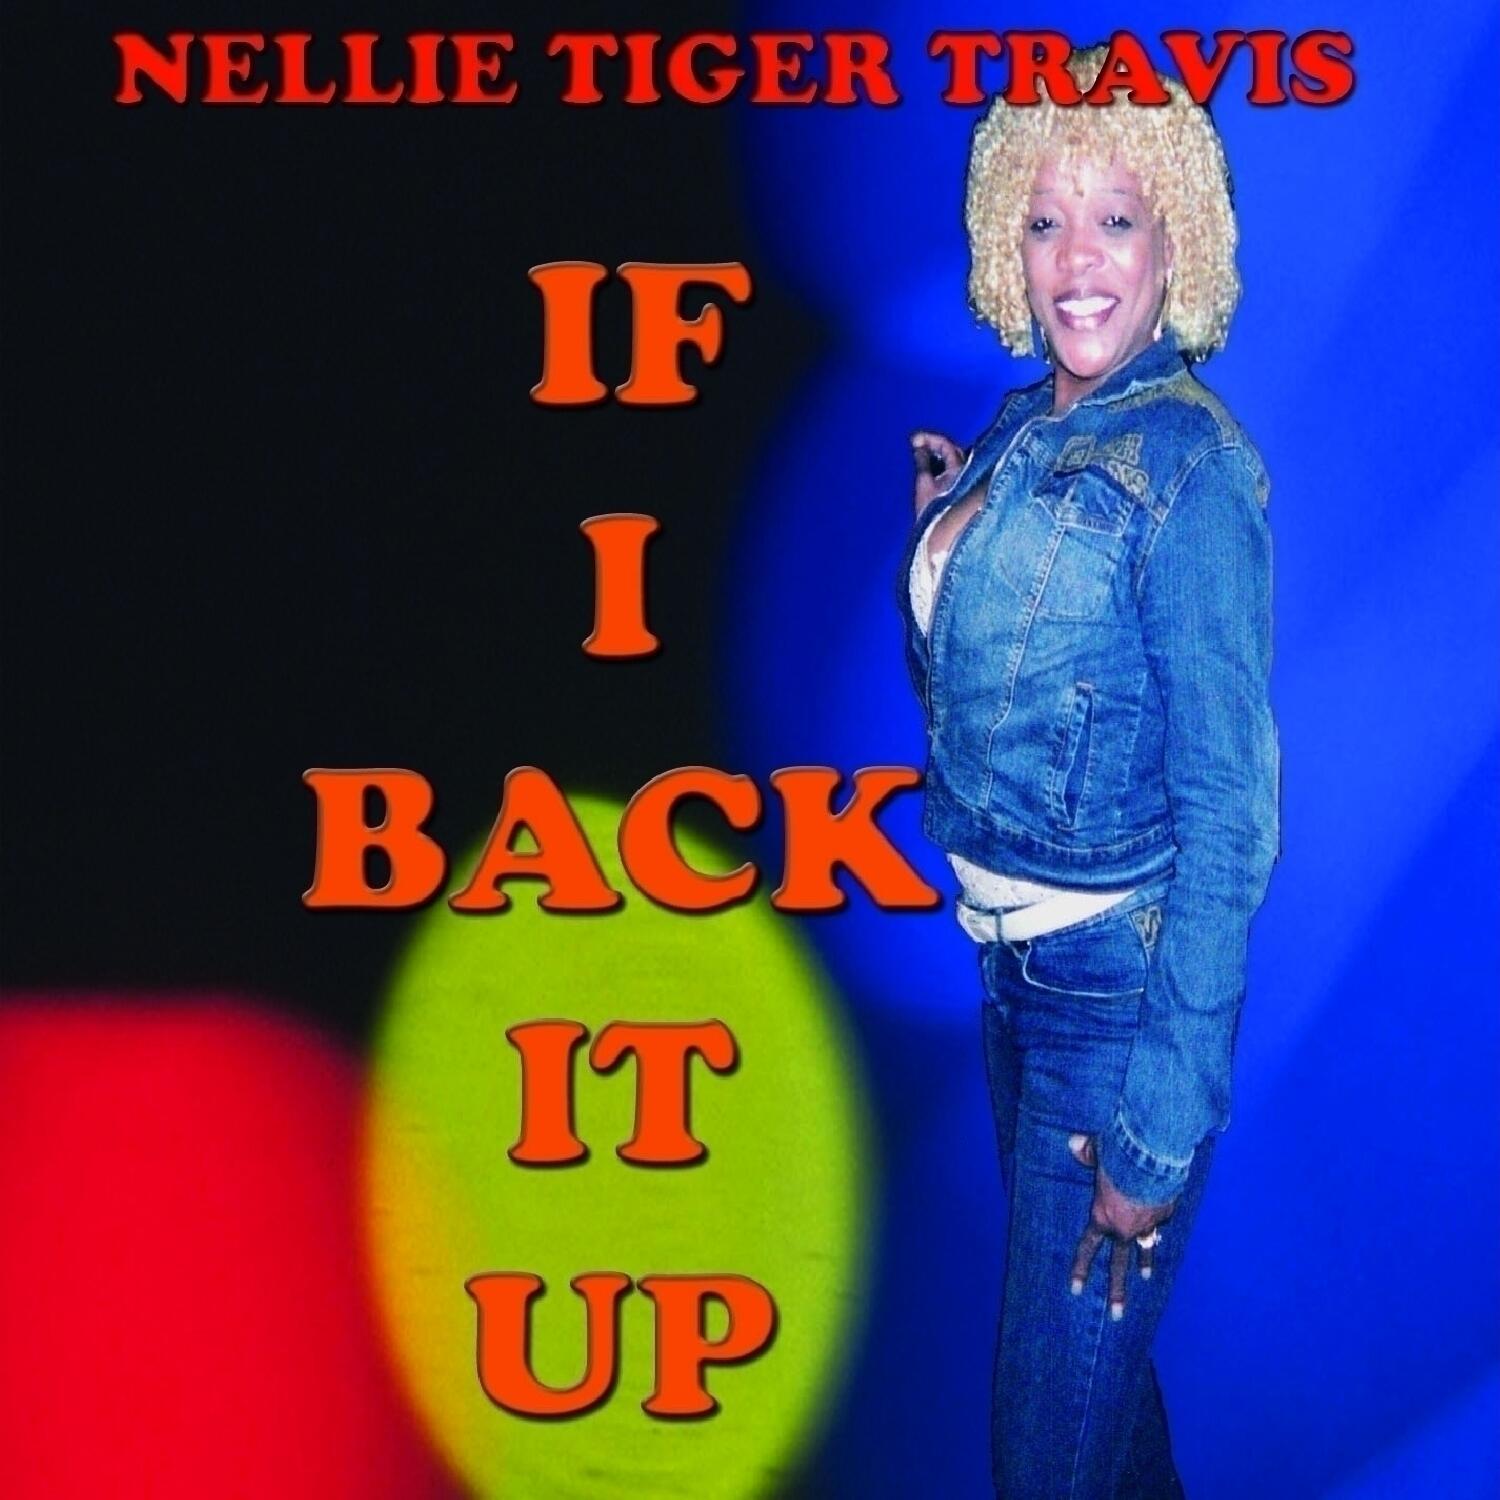 Listen Free To Nellie Tiger Travis If I Back It Up Radio On